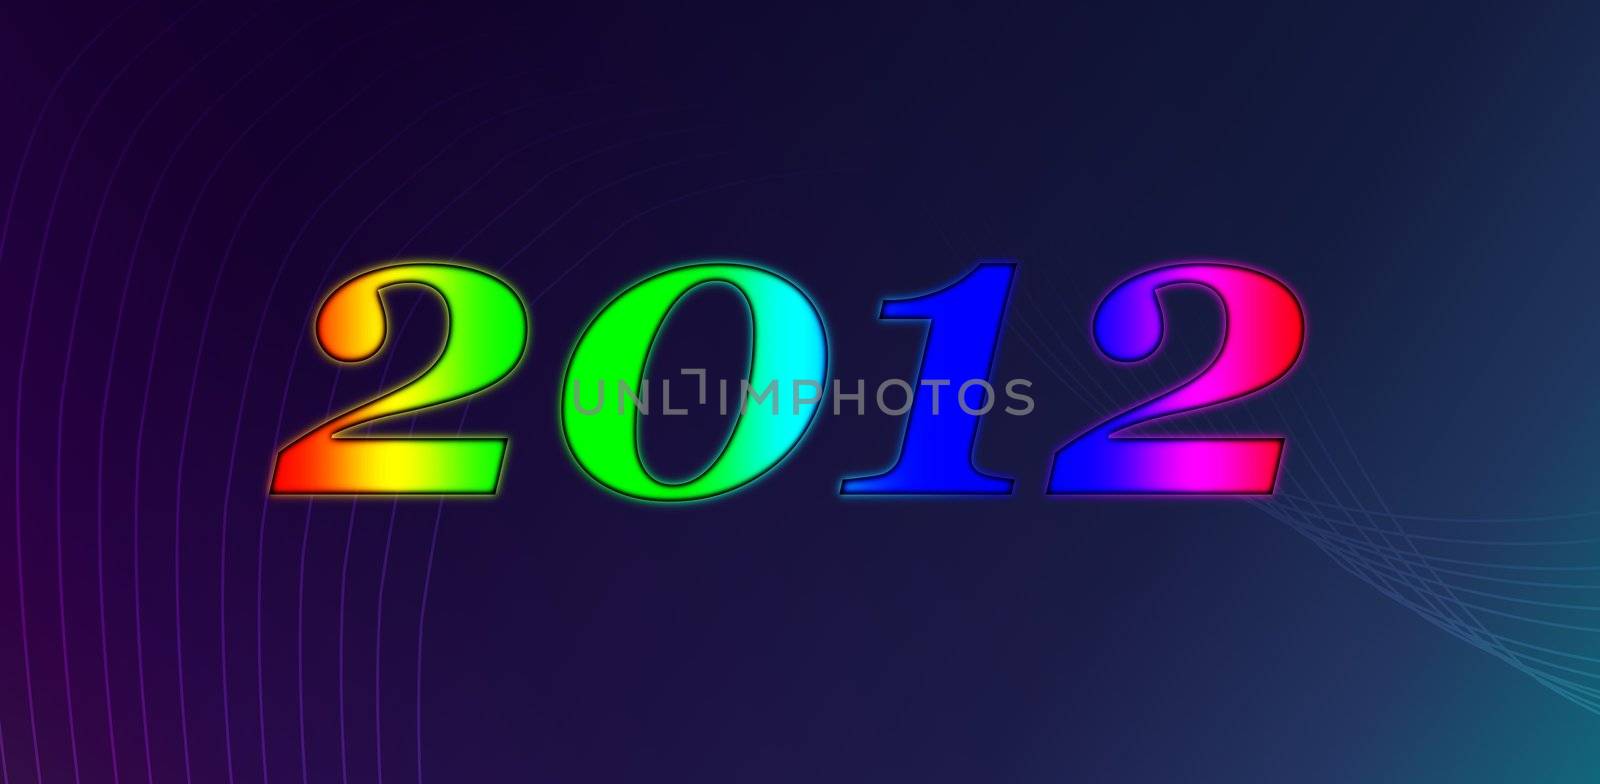 New Year 2012 by hlehnerer